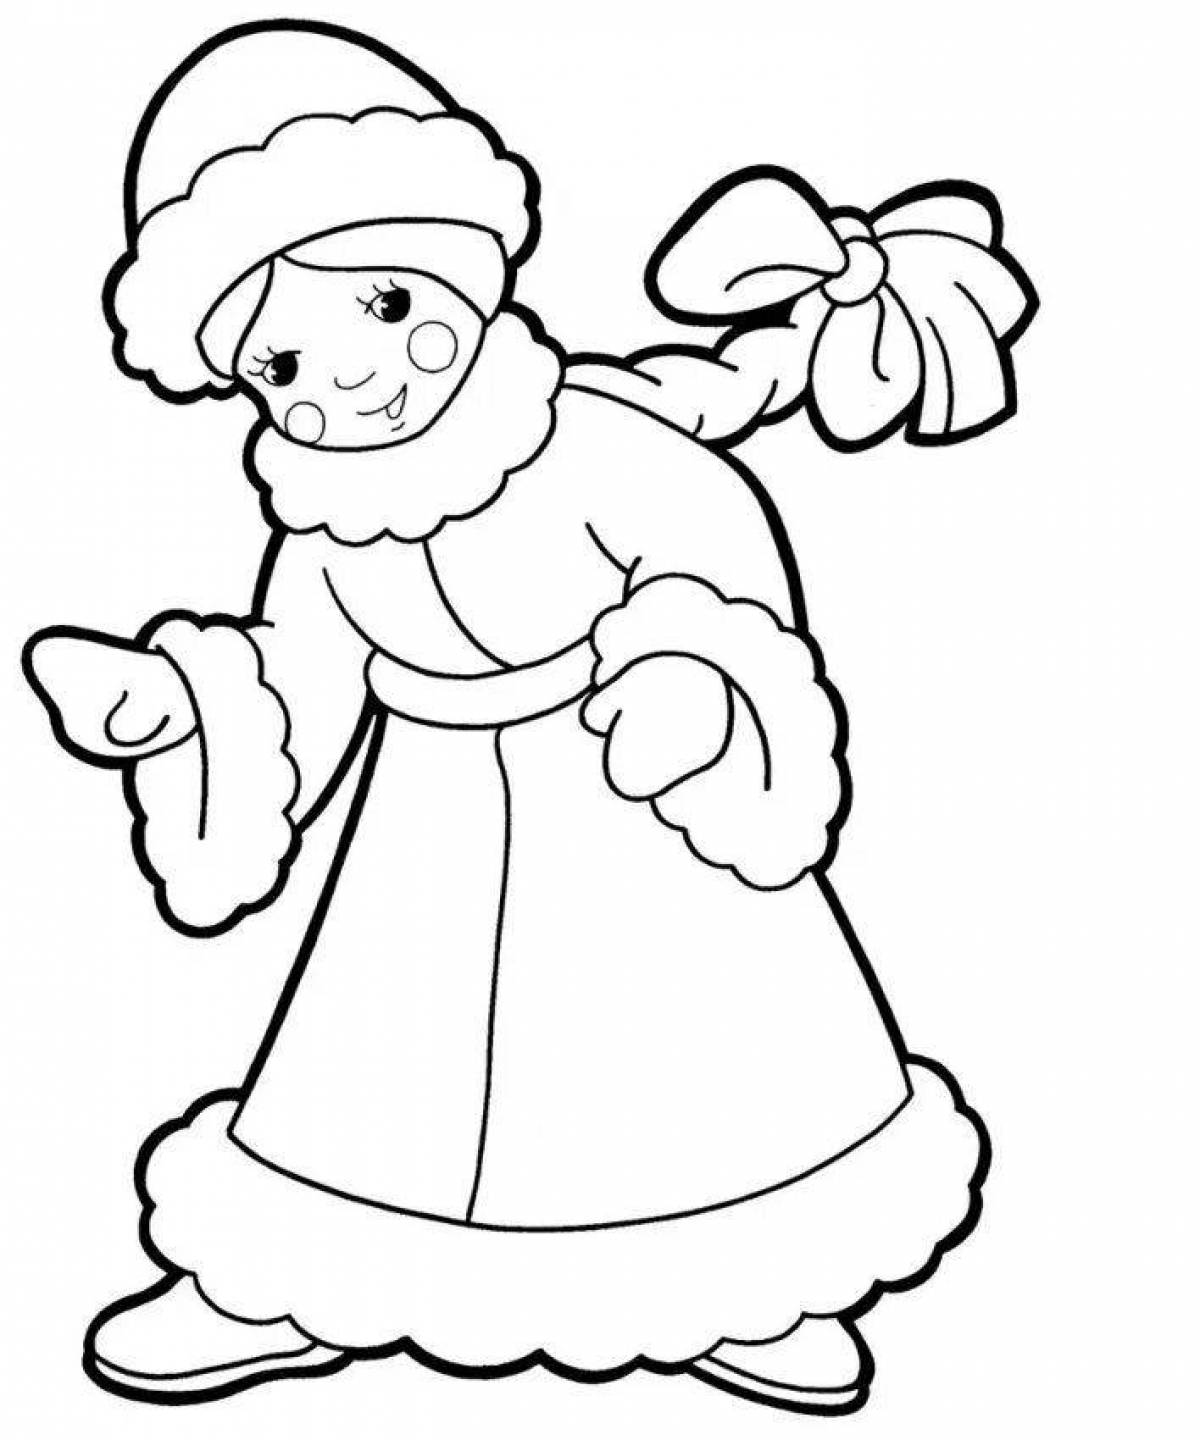 Coloring book flawless snow maiden